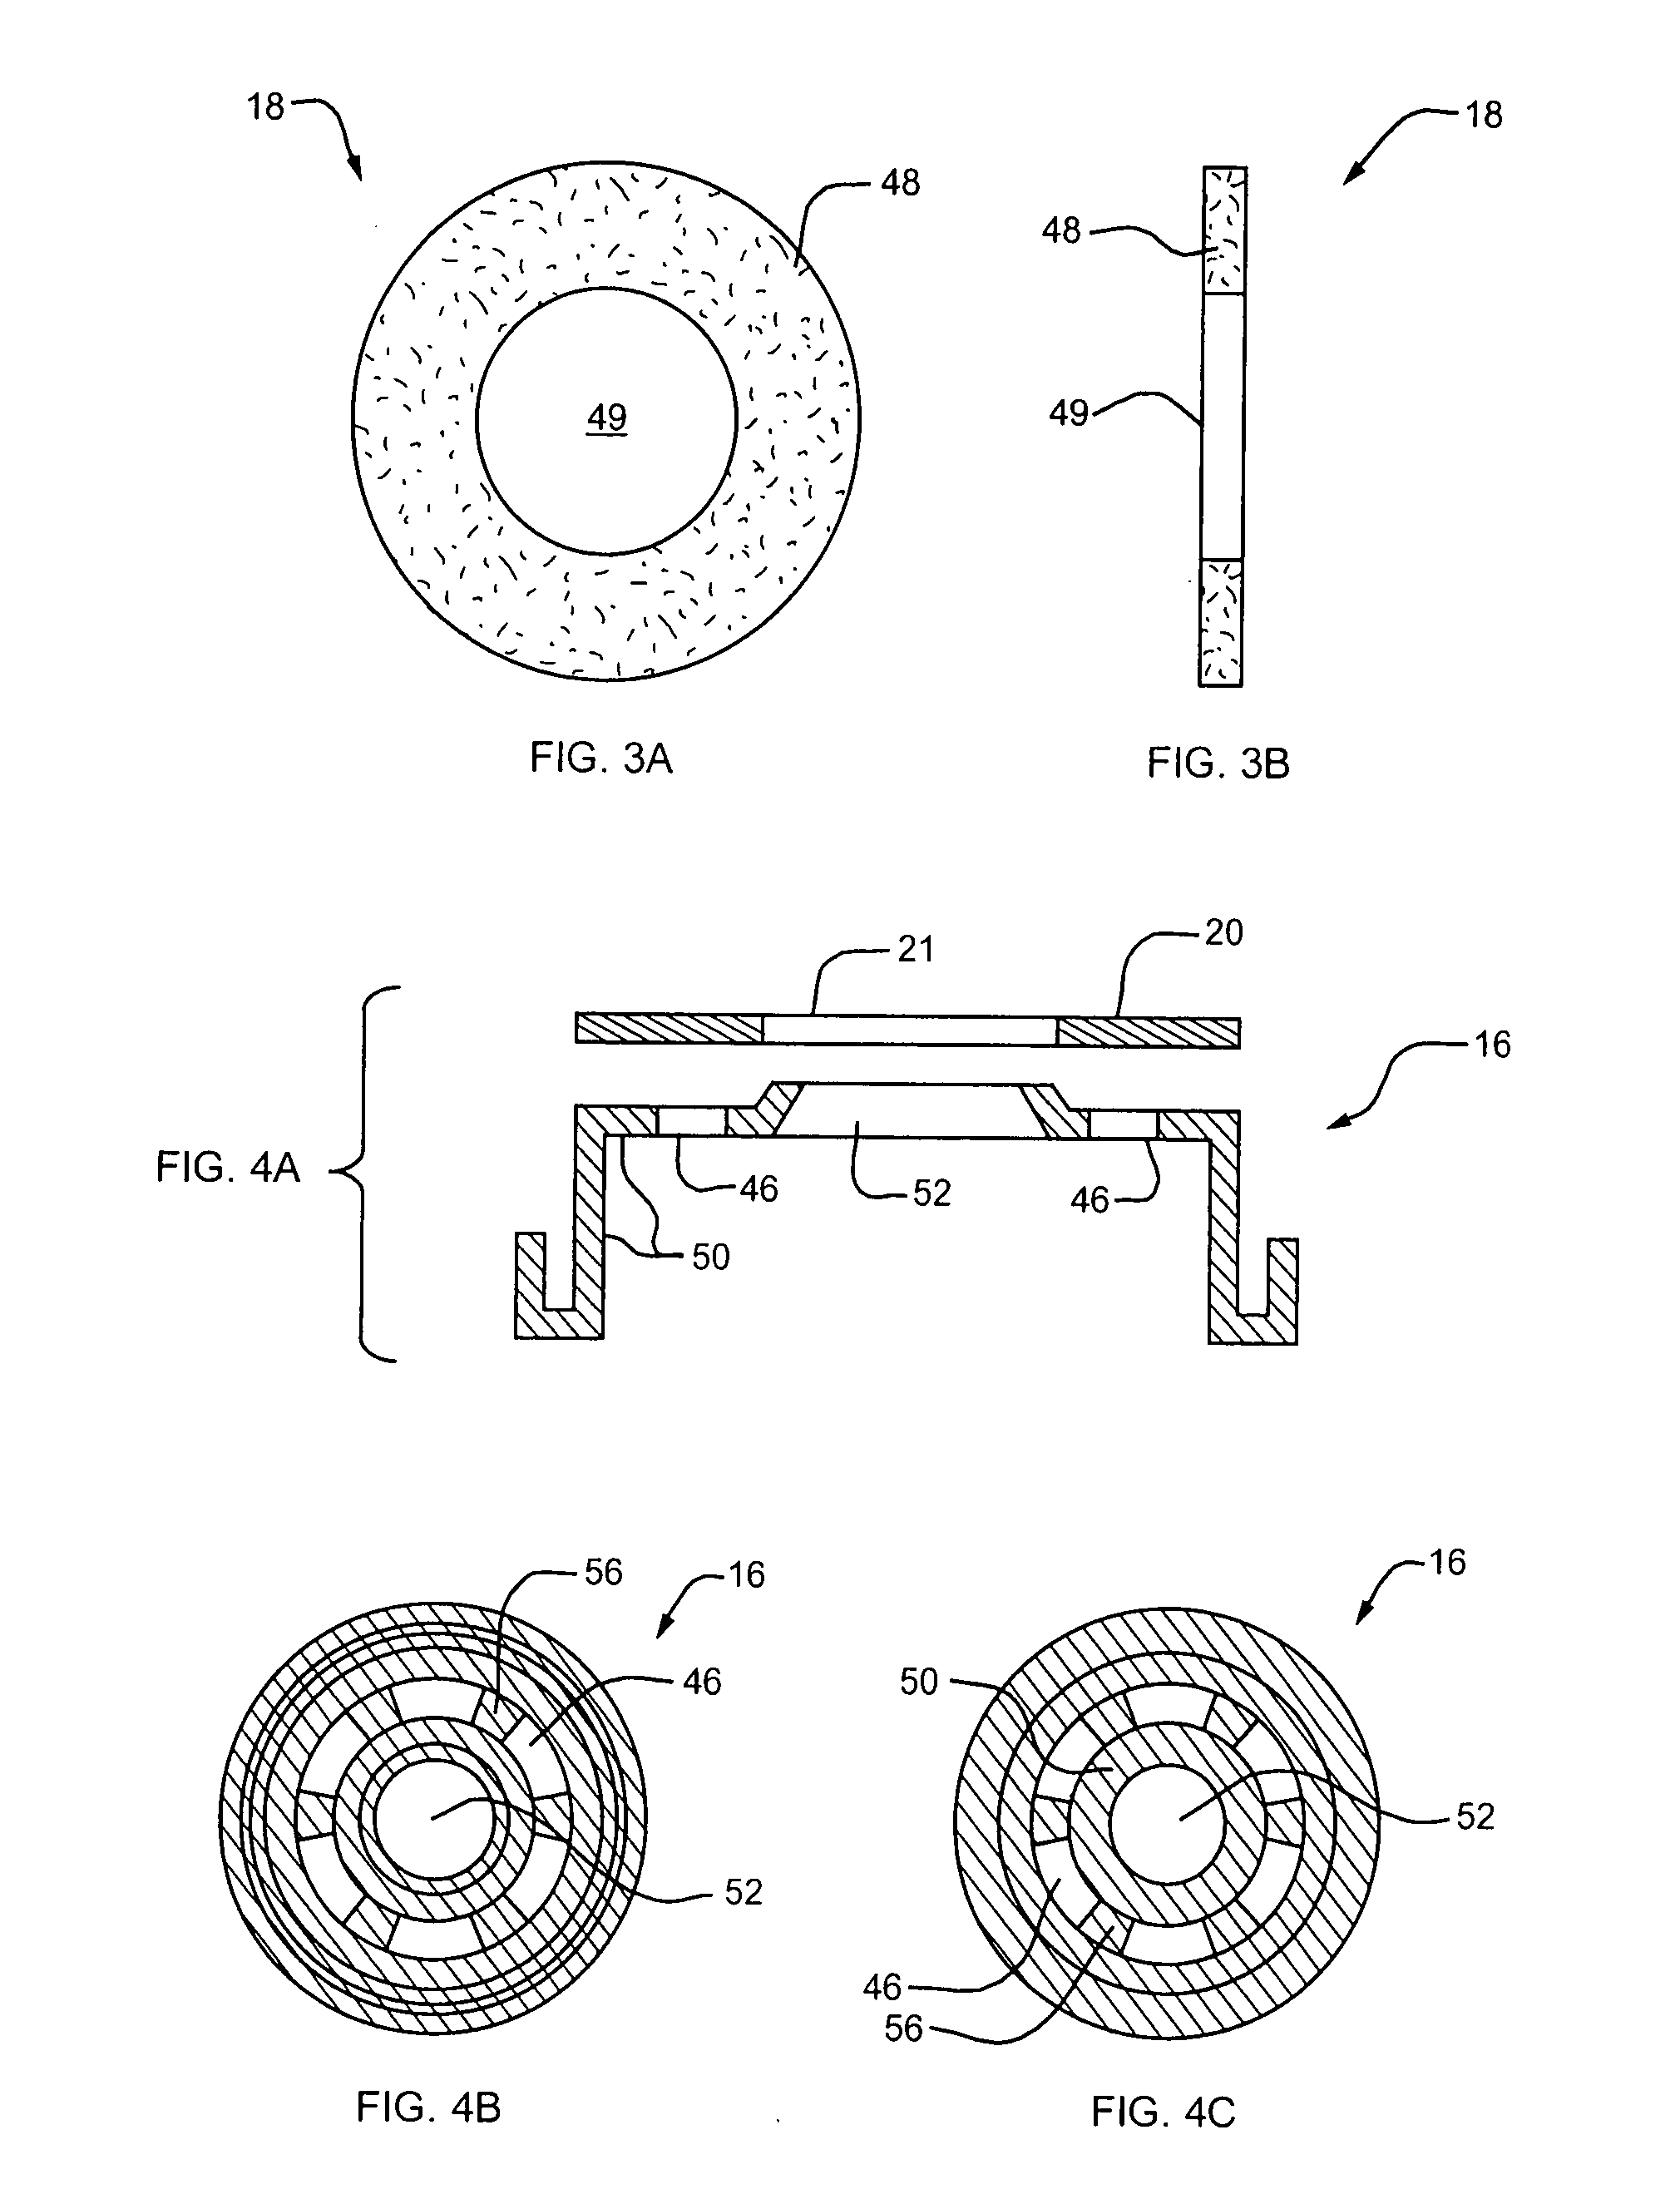 Needle penetrable and laser resealable lyophilization device and related method